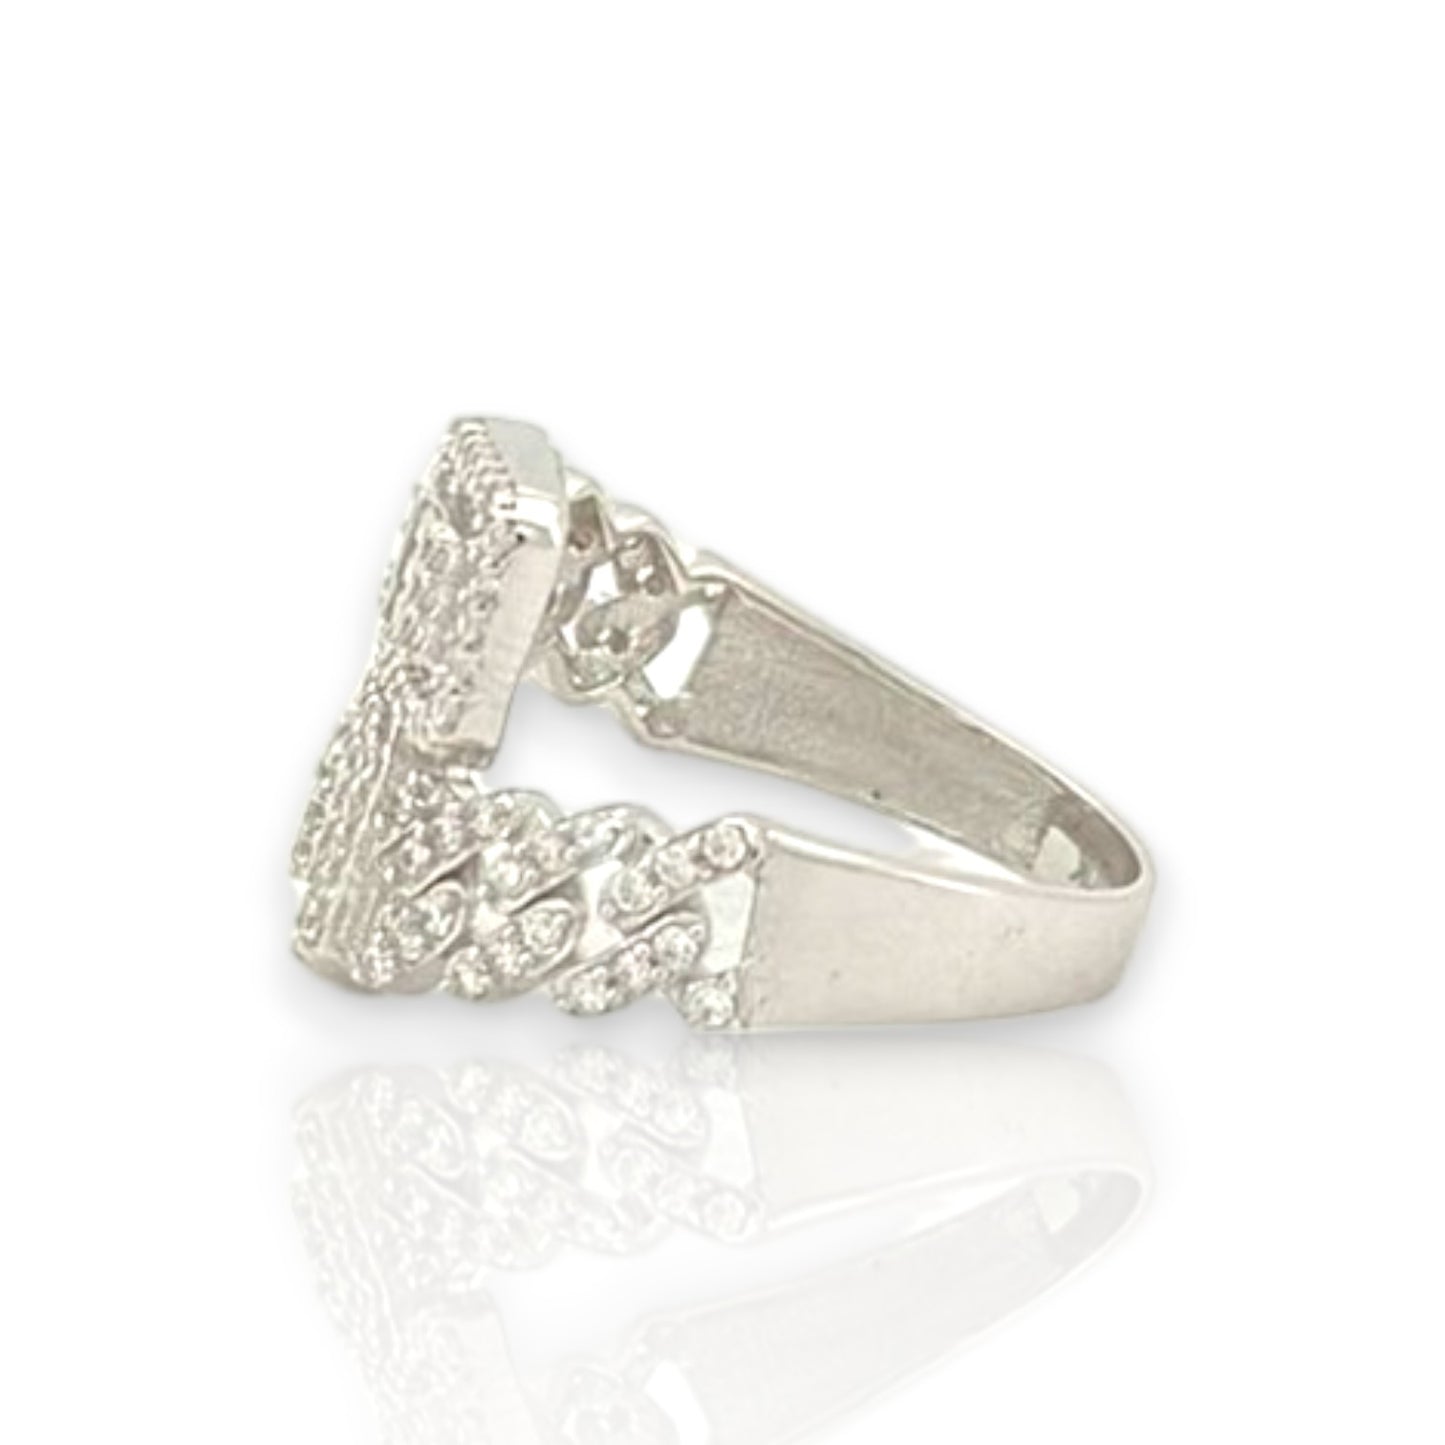 Miami Cuban With Baguette and Round Cut Wrap  Ring With CZ - 10K White Gold